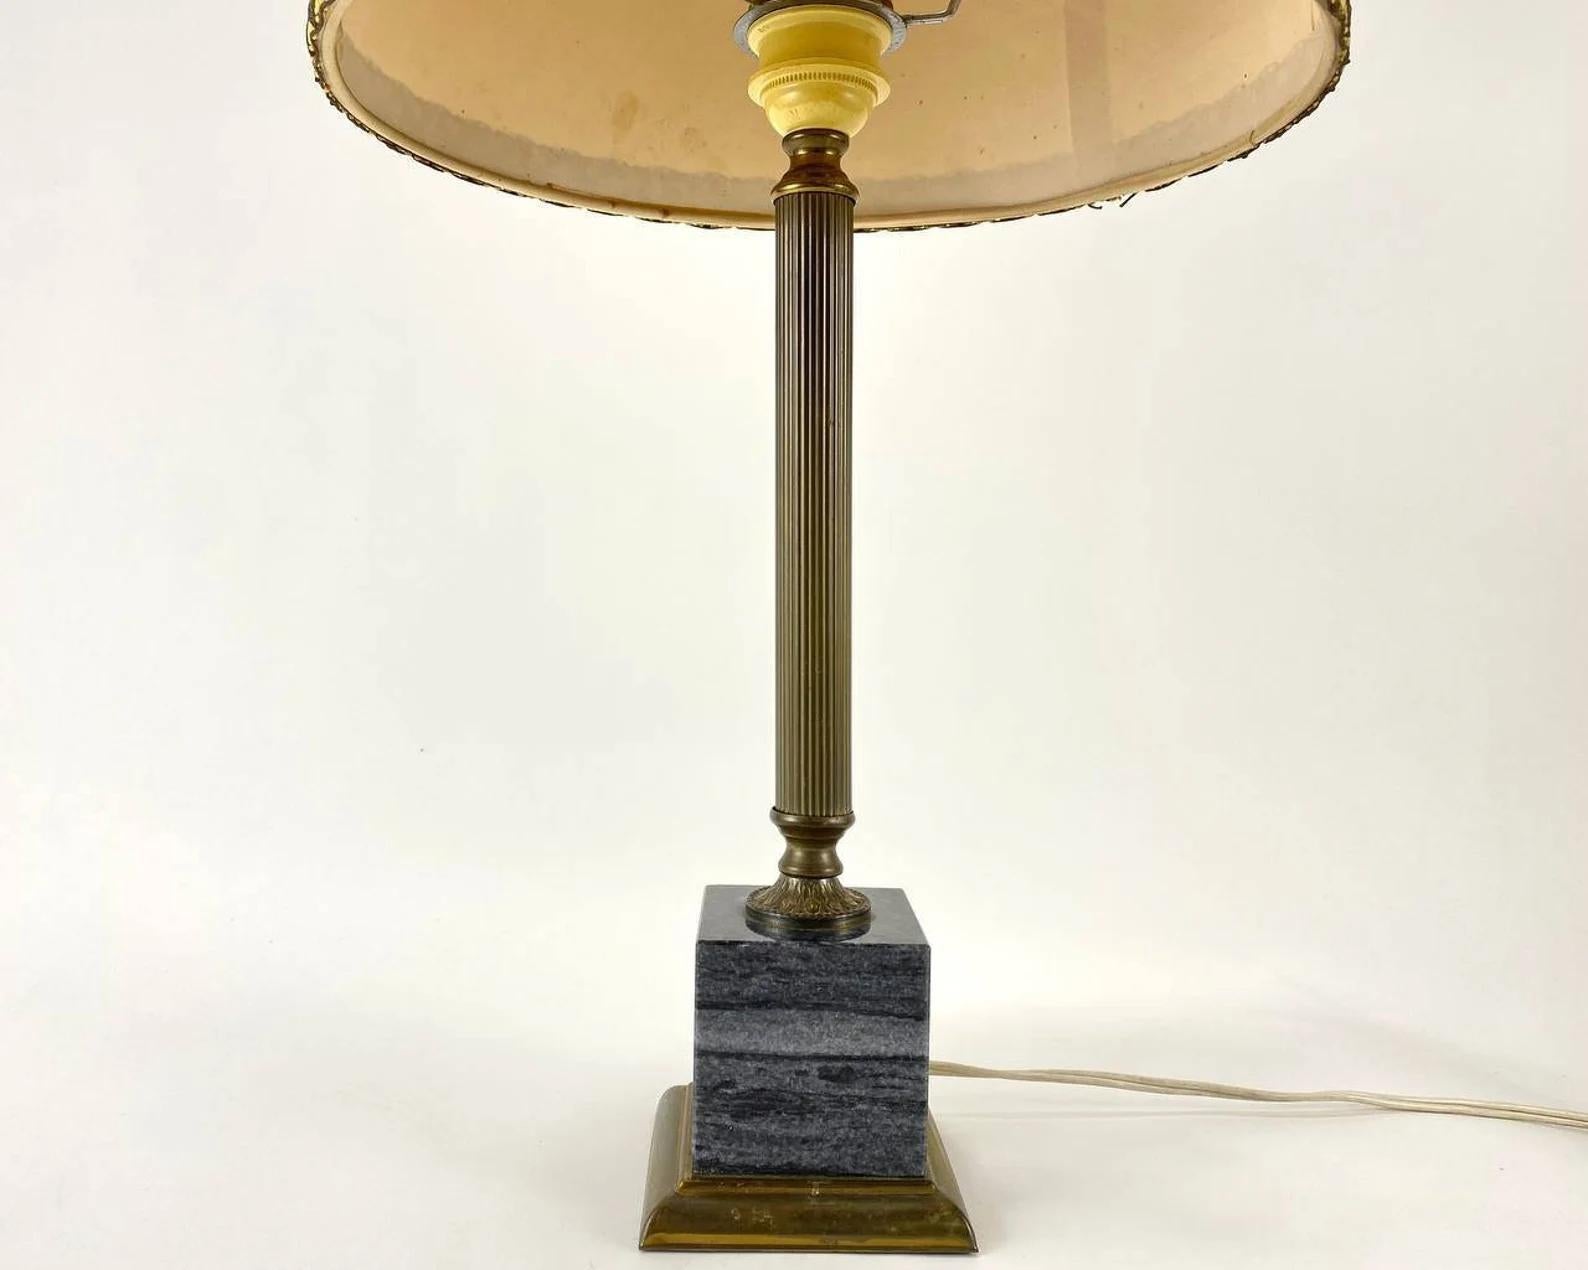 We bring to your attention a Unique Vintage Table Lamp made of brass.

This tall table lamp is made in a laconic design. Elegant and stylish, it will emphasize the impeccable taste of its owner.

Thanks to the universal color solution, the